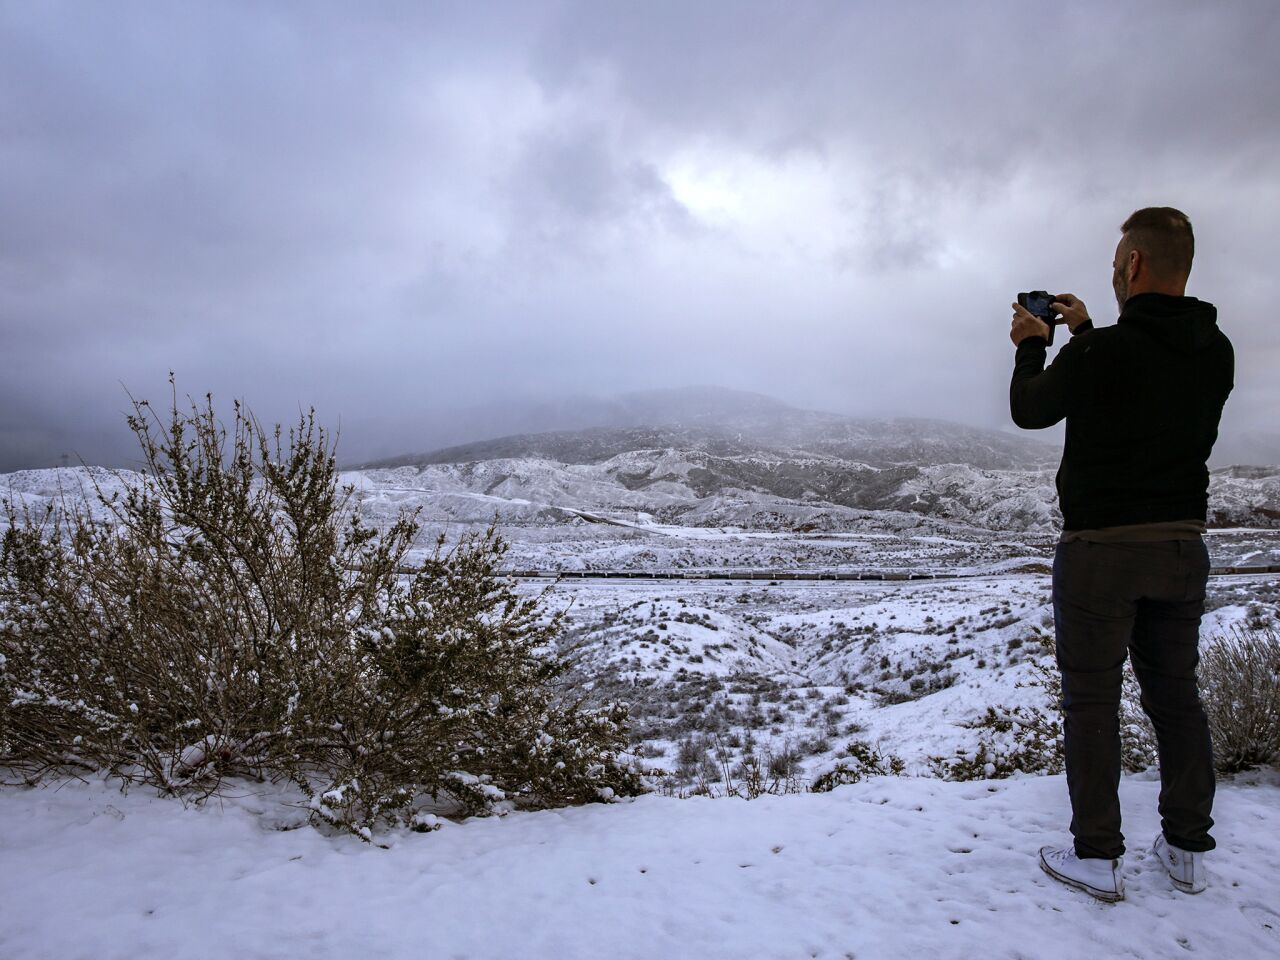 Greg Hunkle, on his way to Las Vegas, stops at Cajon Summit on Thursday morning to take a photo of snow-covered mountains.